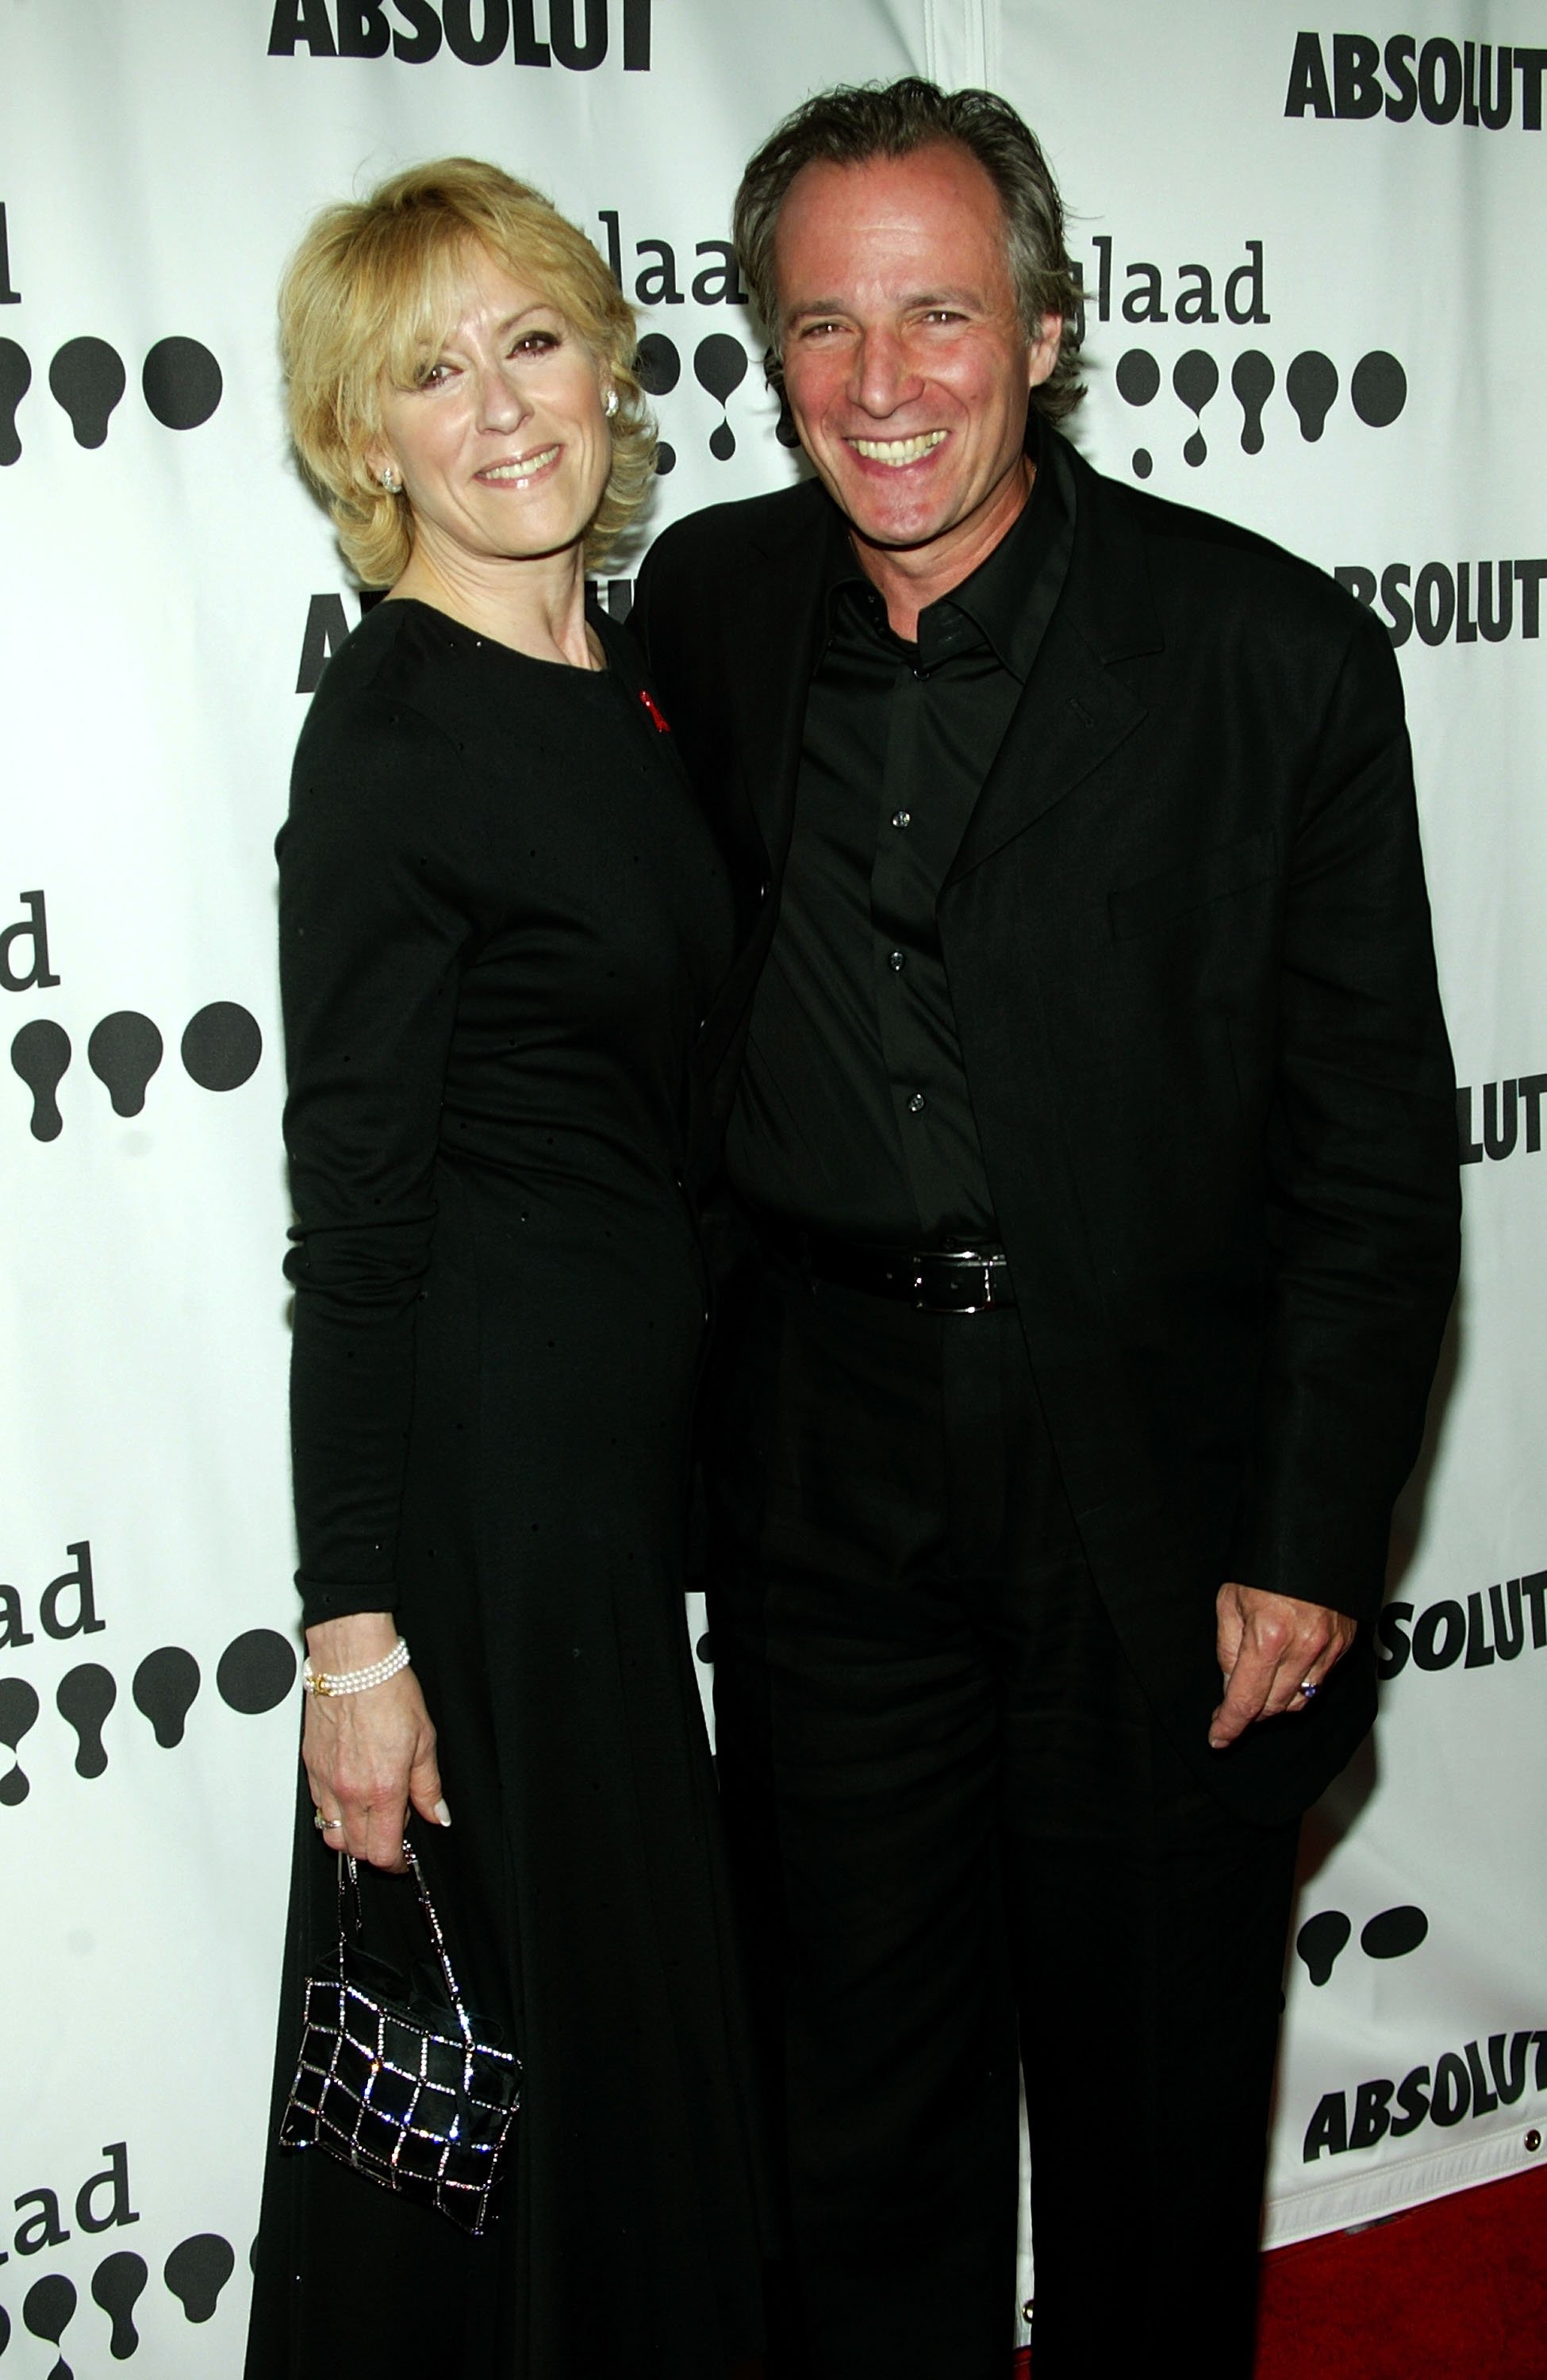 Judith Light and Robert Desiderio arrive at the 16th Annual GLAAD Media Awards at the Kodak Theater on April 30, 2005, in Hollywood, California. | Source: Getty Images.